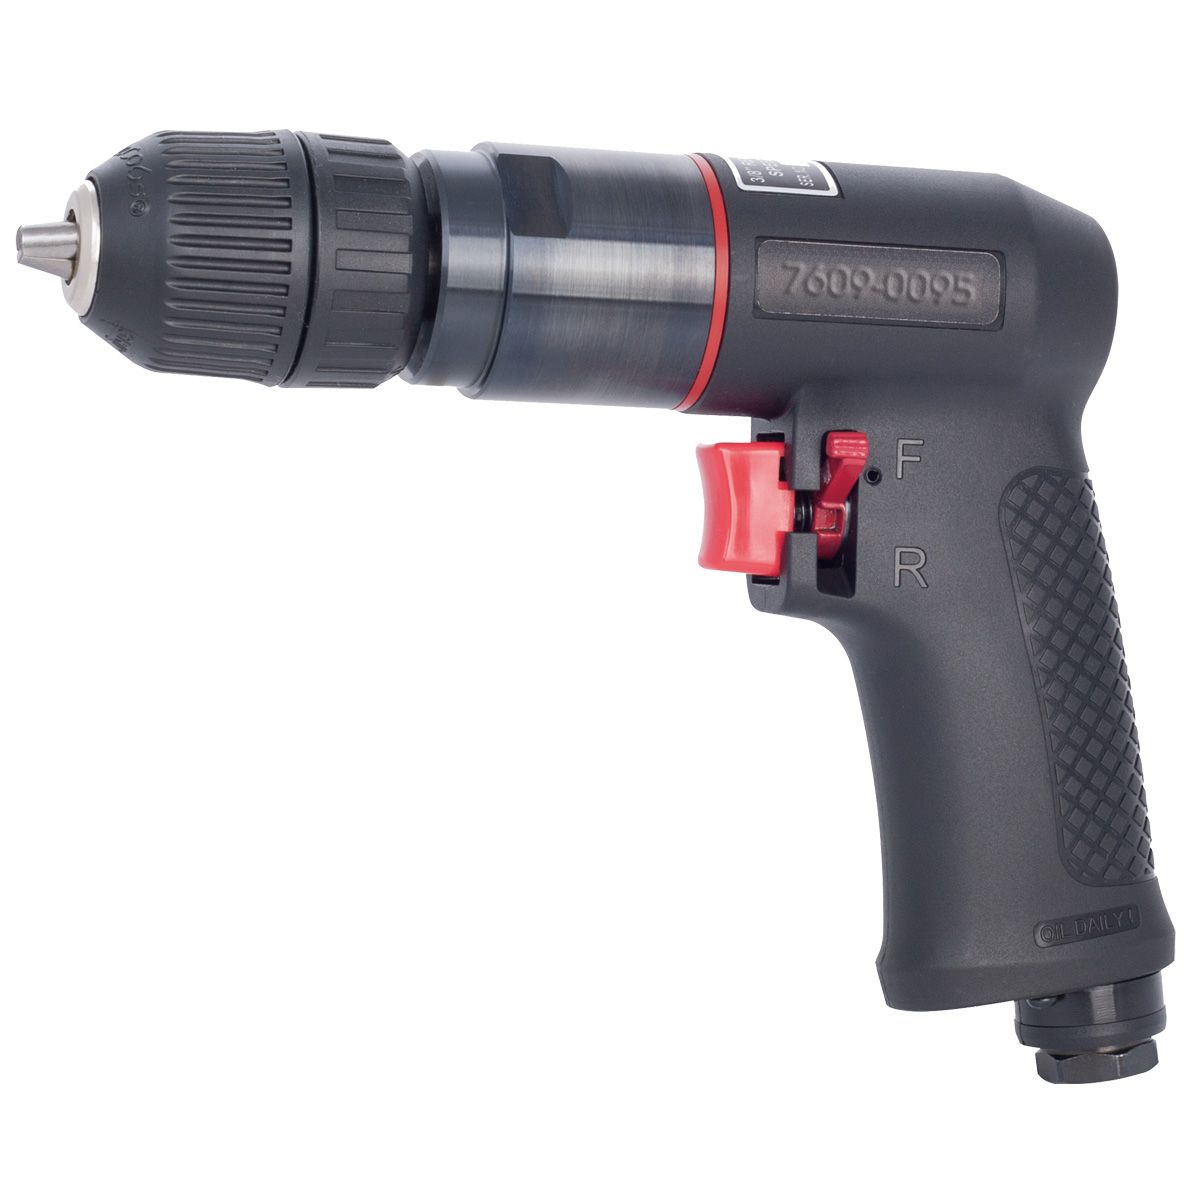 Z-LIMIT 3/8" REVERSIBLE PISTOL TYPE AIR DRILL - MADE IN TAIWAN (7609-0095)